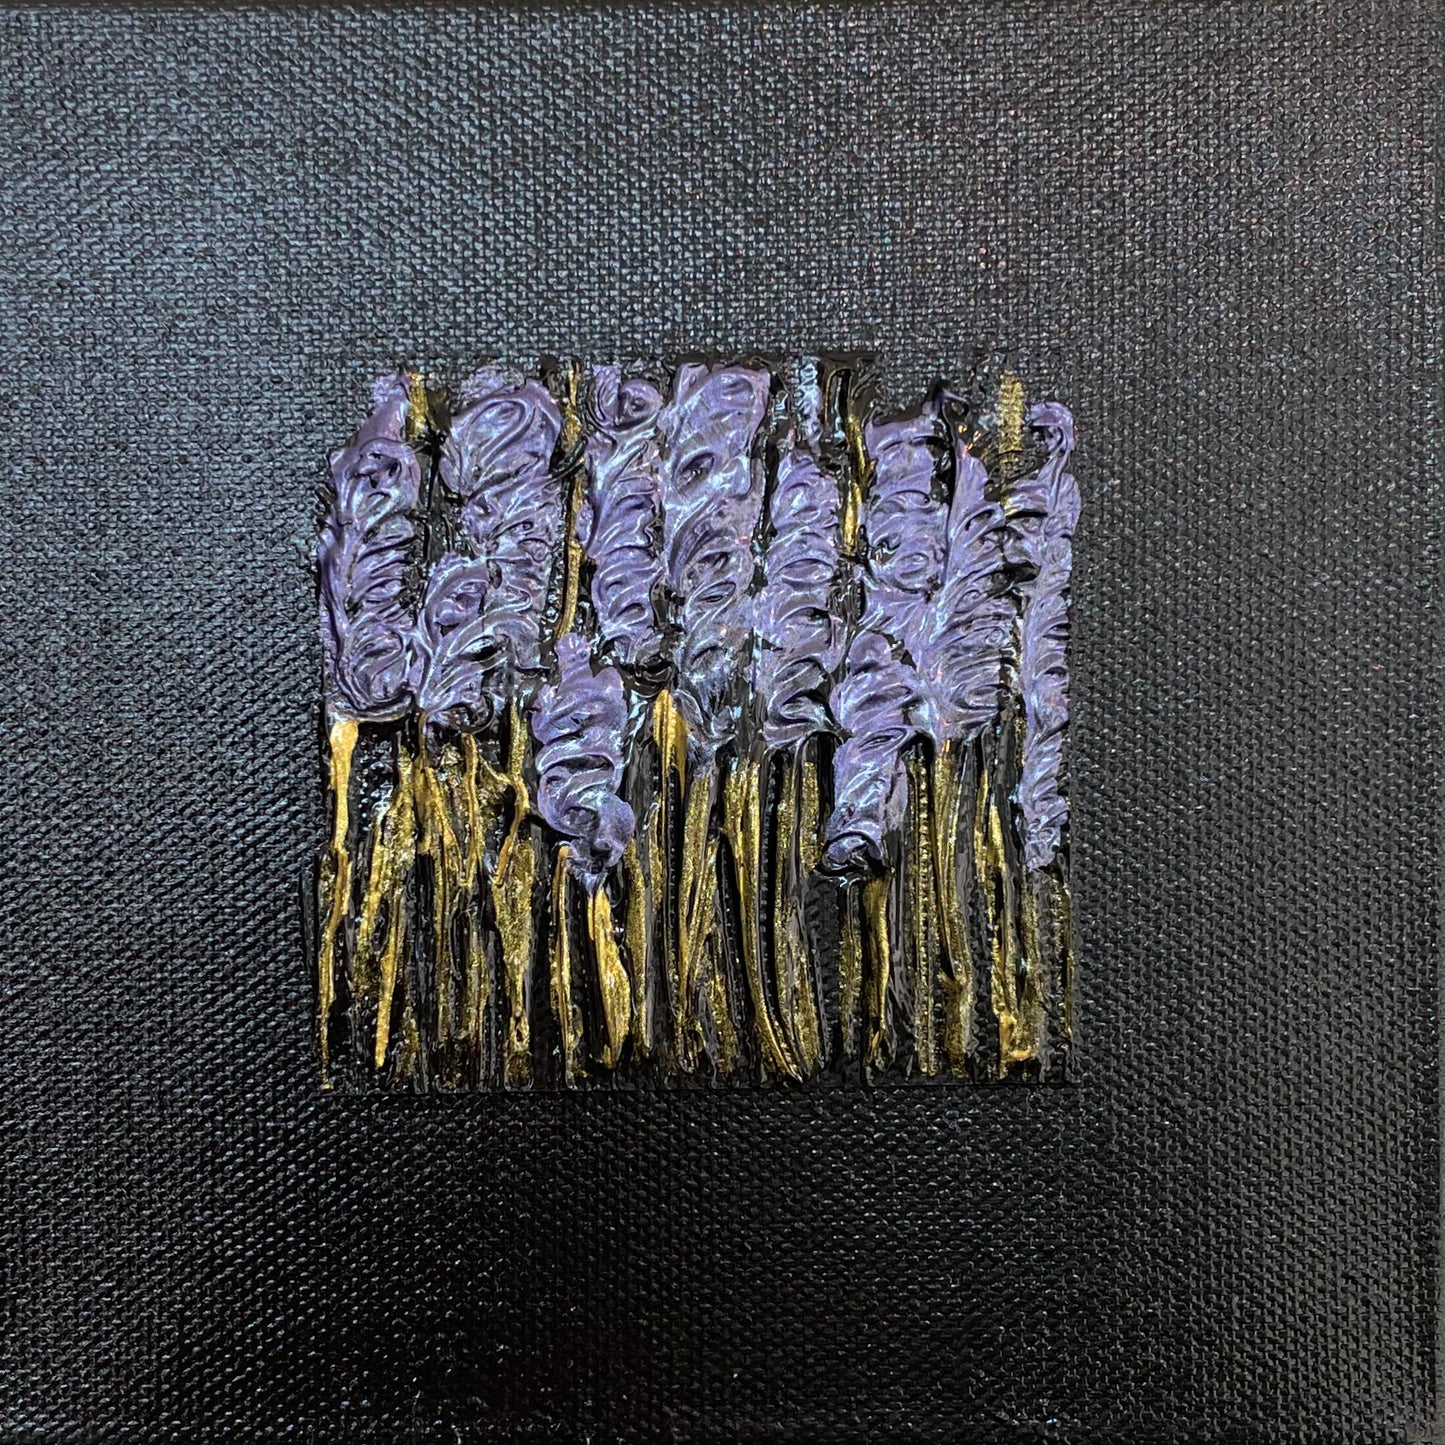 Lavender No. 2 by Laura Taylor Shields